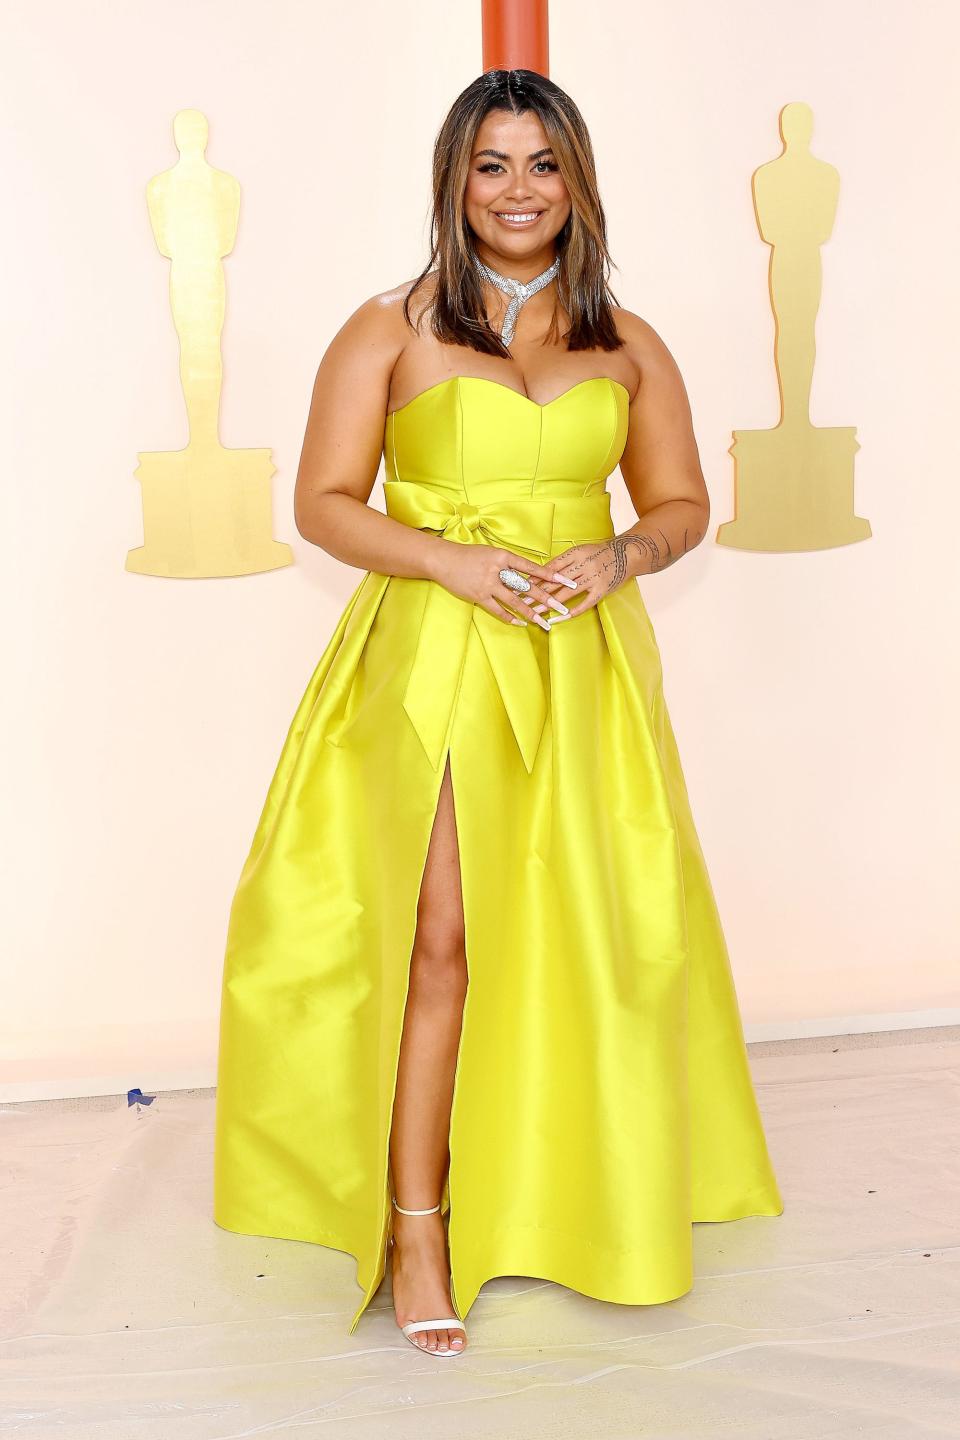 Drew Afualo attends the 2023 Academy Awards.